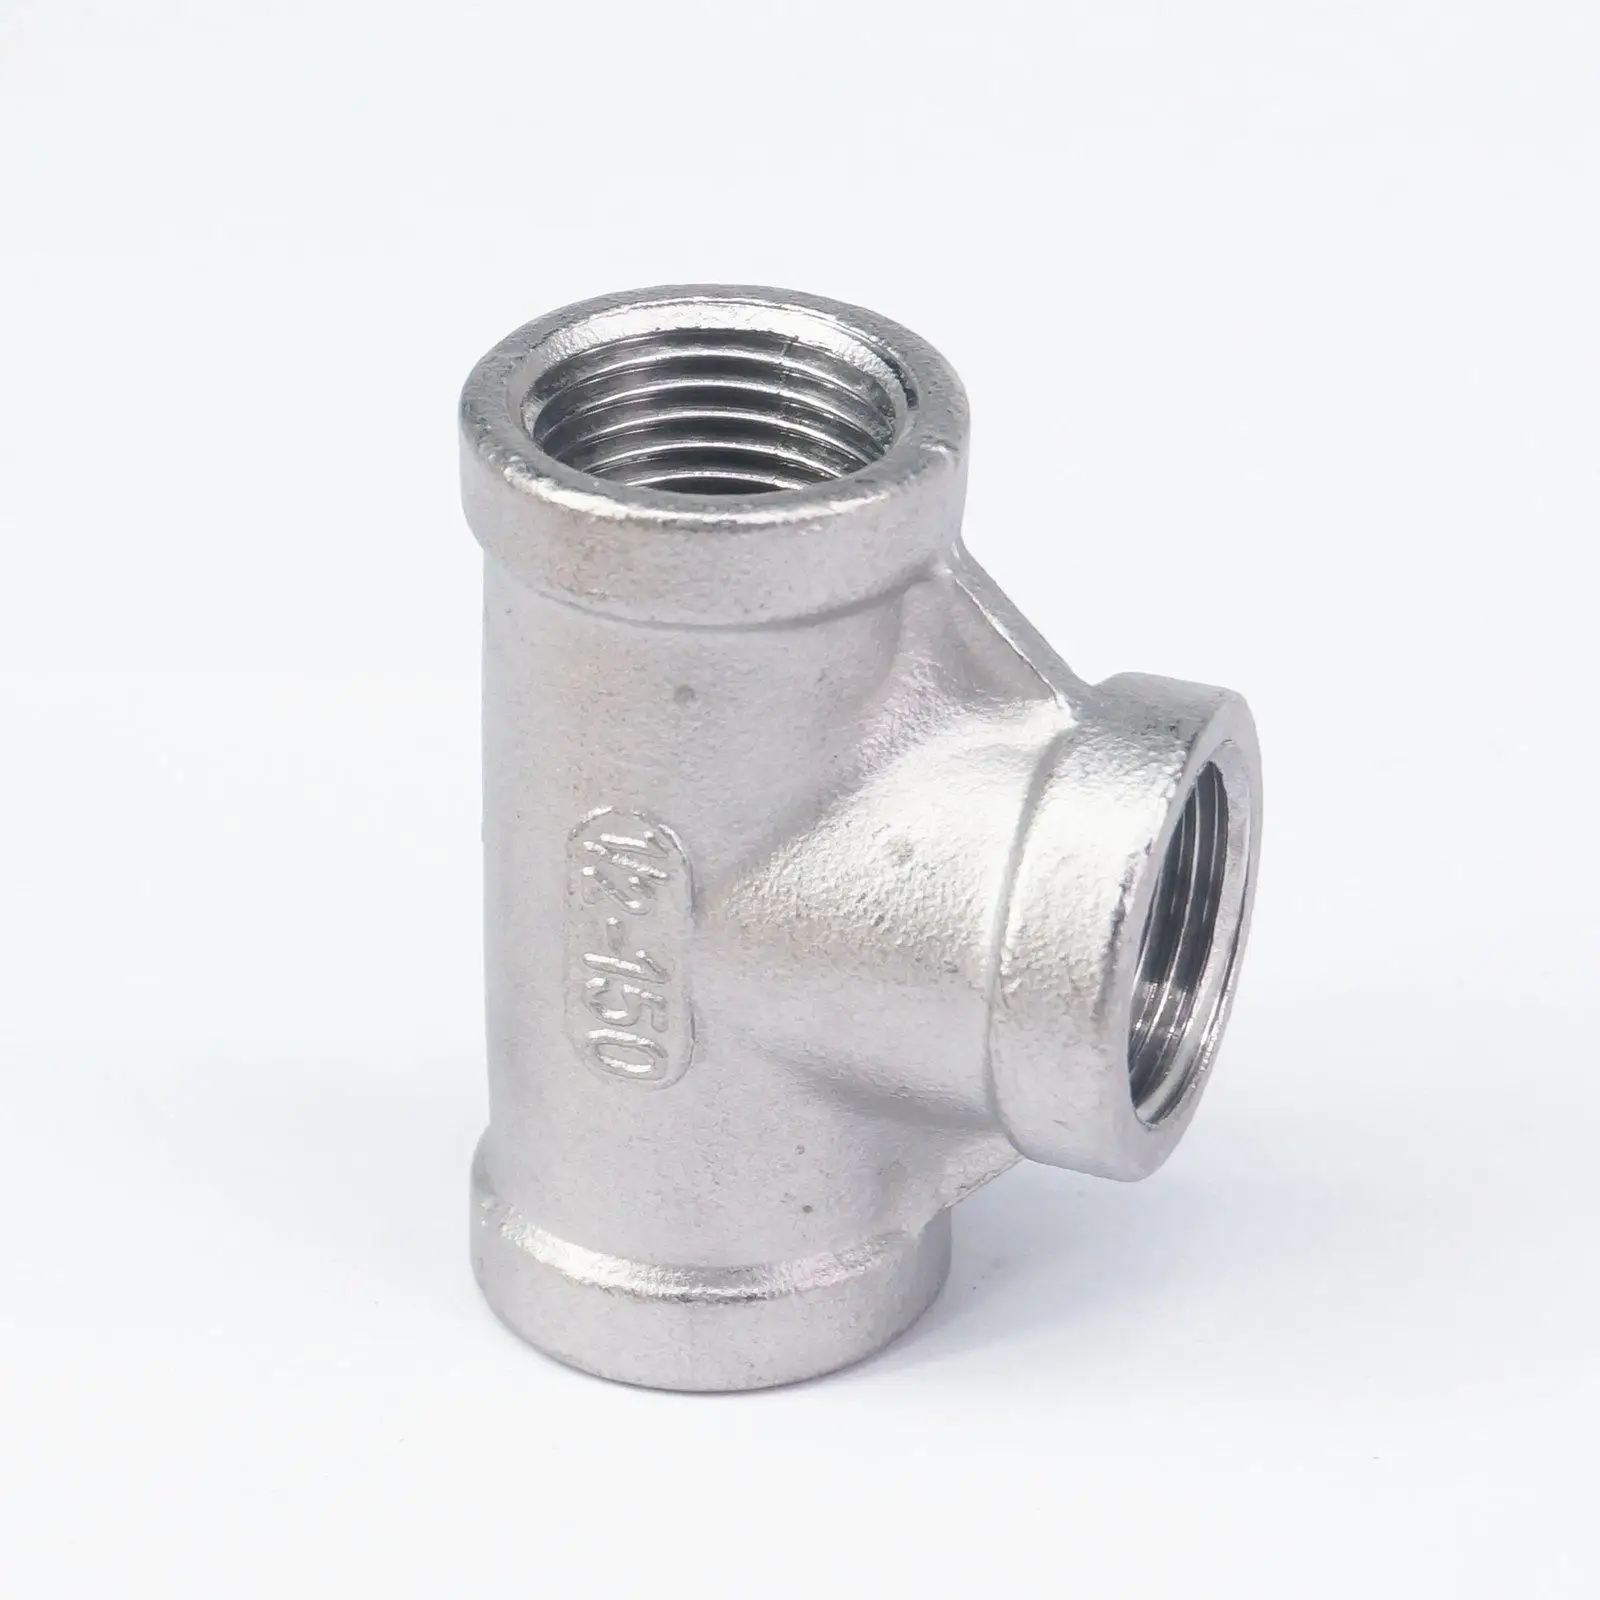 1/4" Tee 3 way Female SUS SS 304 Stainless Steel Threaded Pipe Fitting BSPT 